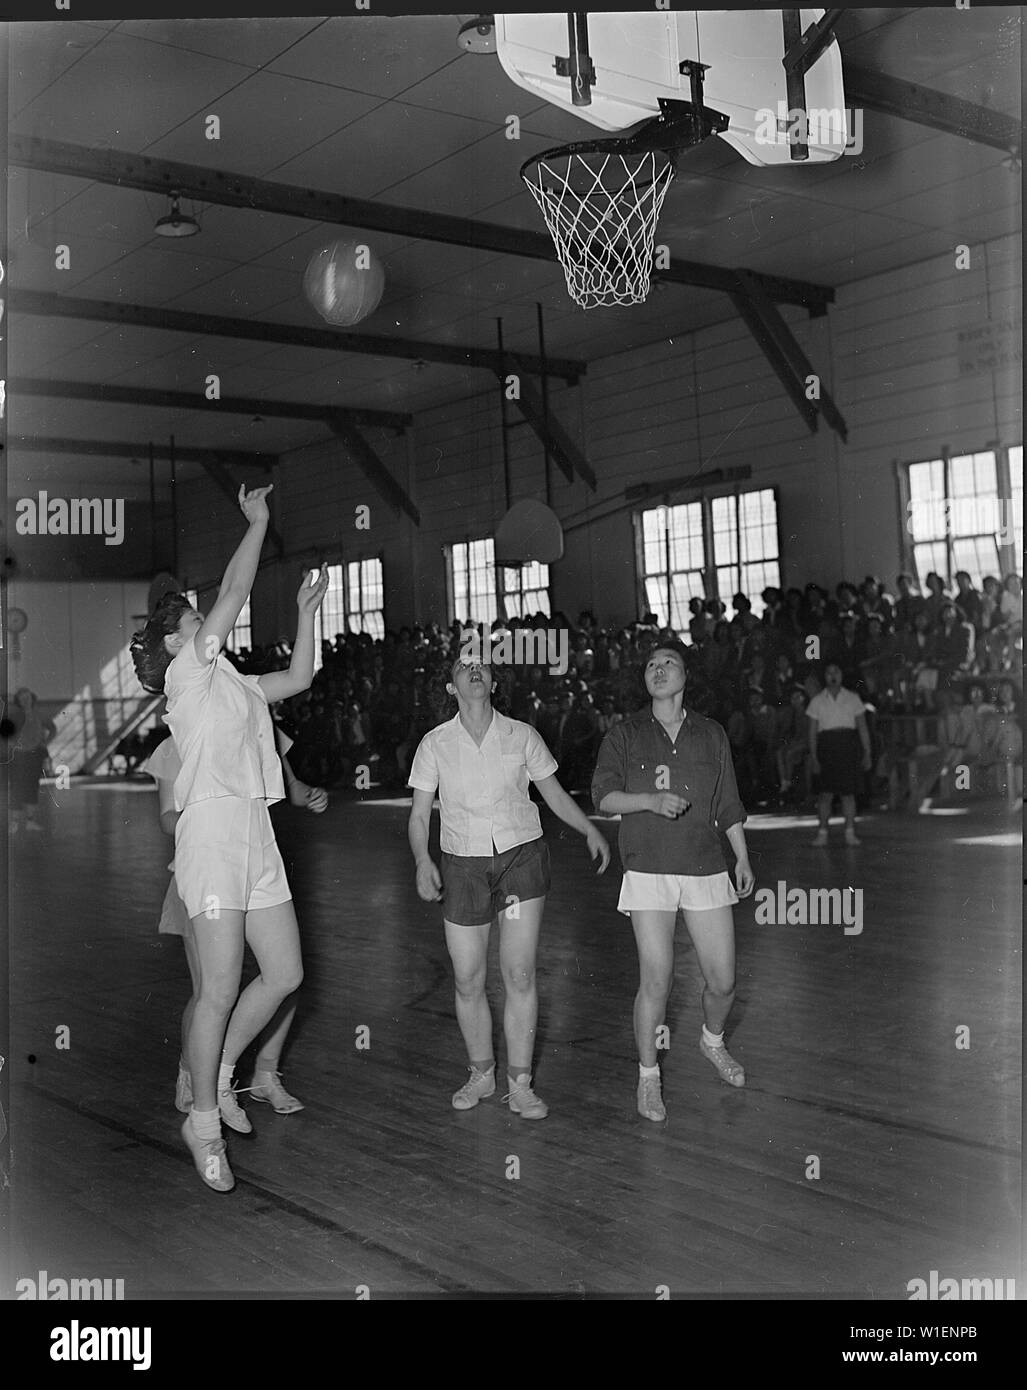 Heart Mountain Relocation Center, Heart Mountain, Wyoming. A hotly contested interscholastic basket . . .; Scope and content:  The full caption for this photograph reads: Heart Mountain Relocation Center, Heart Mountain, Wyoming. A hotly contested interscholastic basketball game between the Heart Mountain and Powell High School girls teams took place at the Heart Mountain Relocation Center on March 18th. The Heart Mountain girls were victorious, with the final score reading 32 - 24. Stock Photo